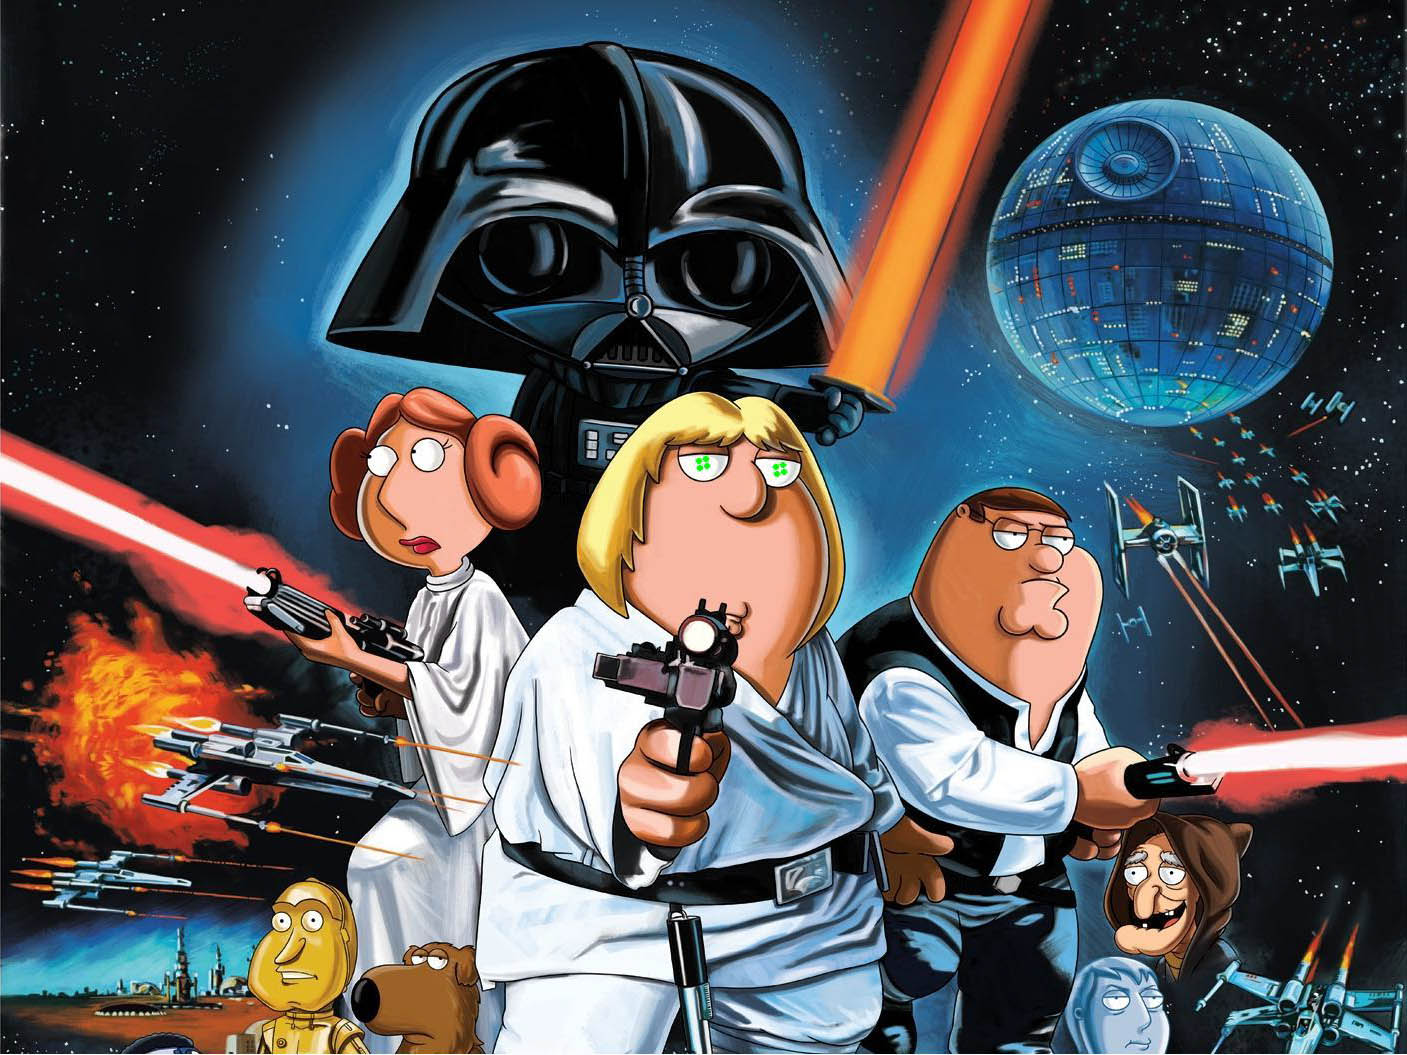 Family Guy Star Wars Wallpaper Pictures To